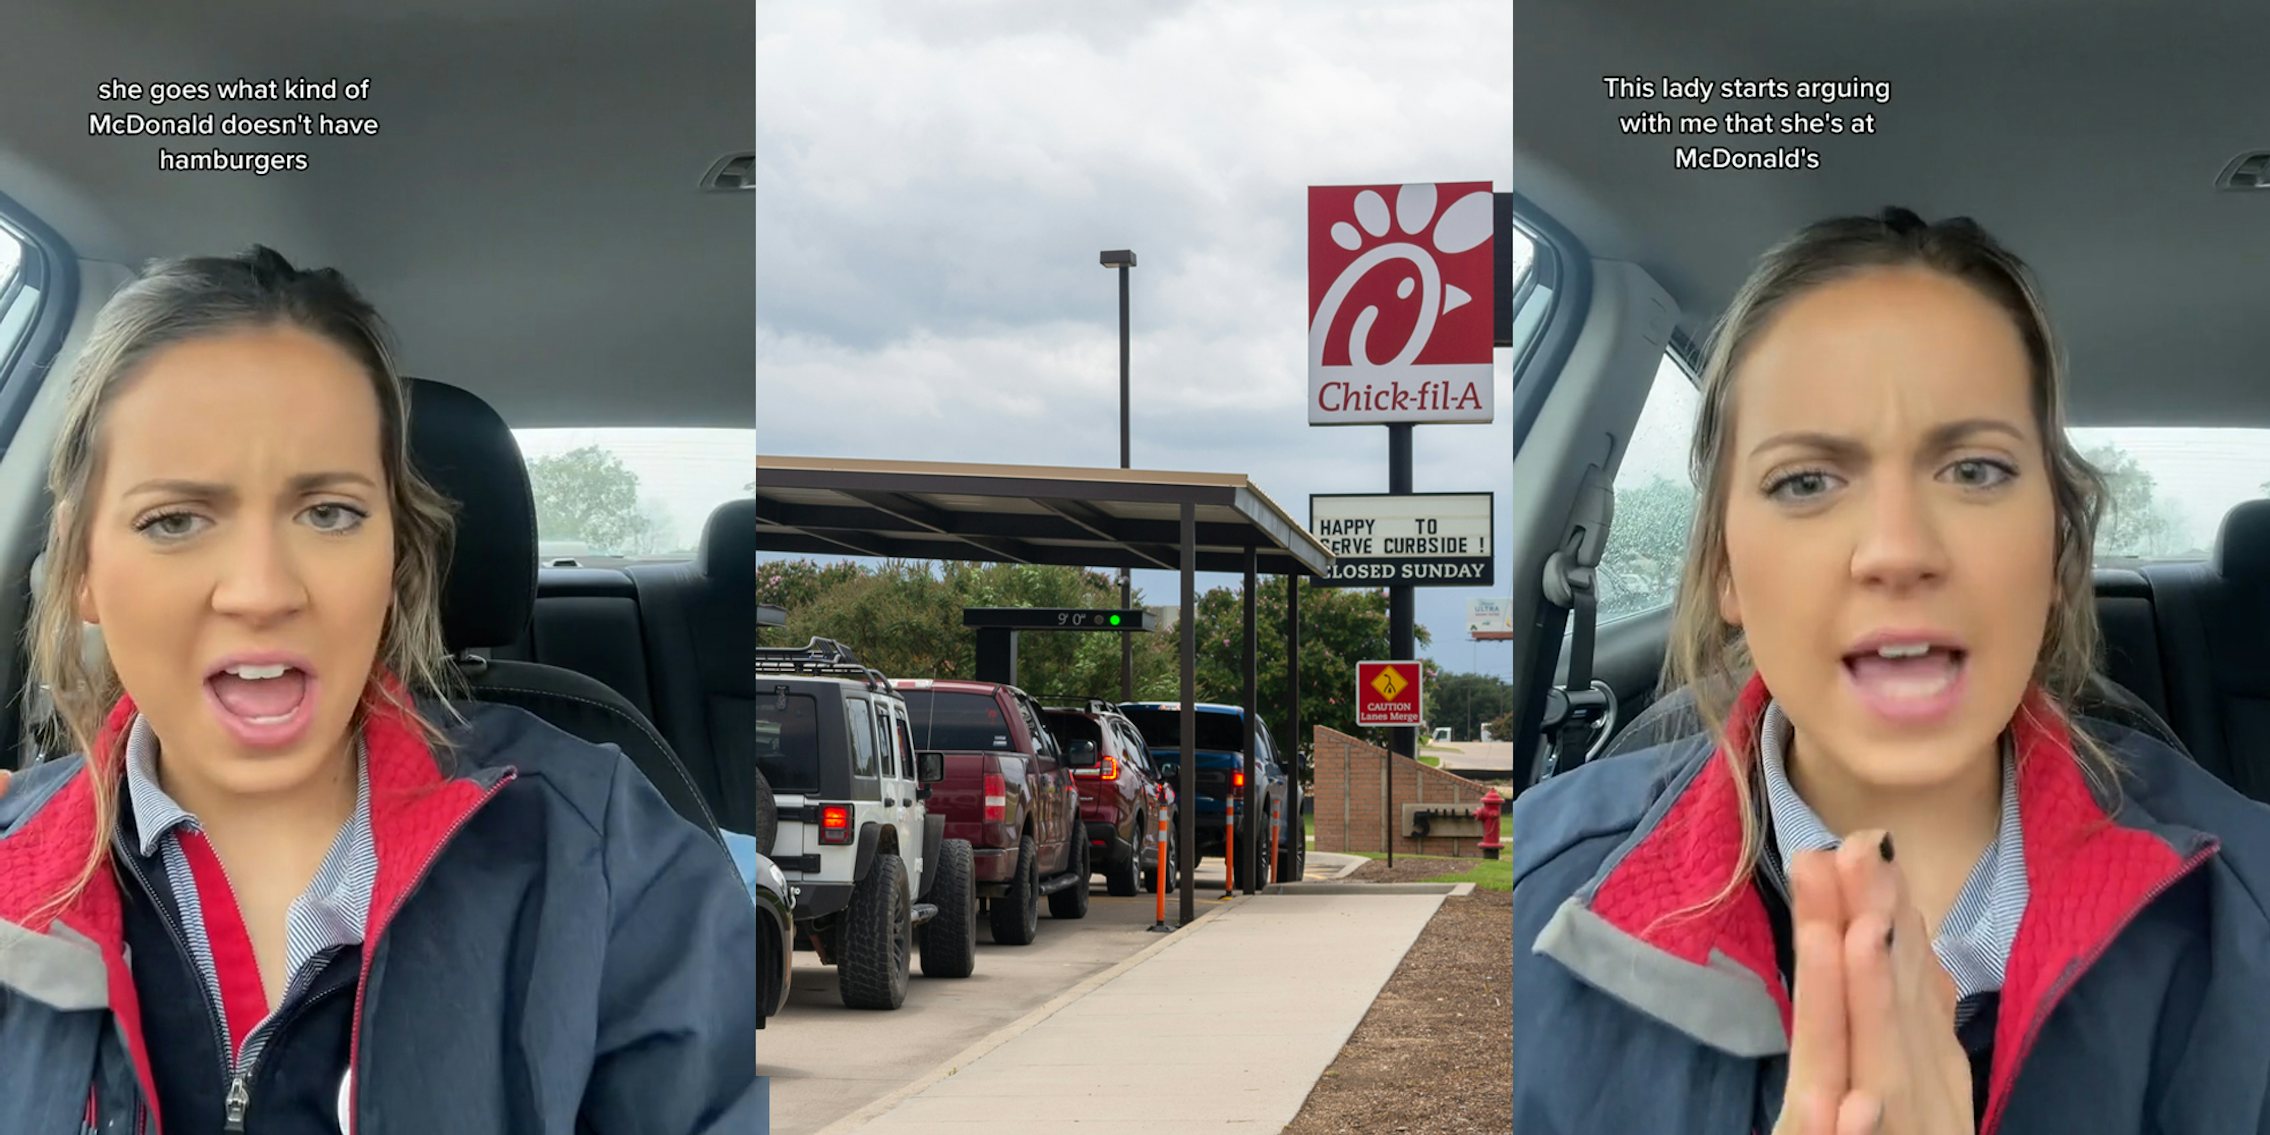 Chick-Fil-A employee speaking in car with caption 'she gies what kind of McDonald's doesn't have hamburgers' (l) Chick-Fil-A drive thru with cars and sign (c) Chick-Fil-A employee speaking in car with caption 'This lady starts arguing with me that she's at McDonald's' (r)